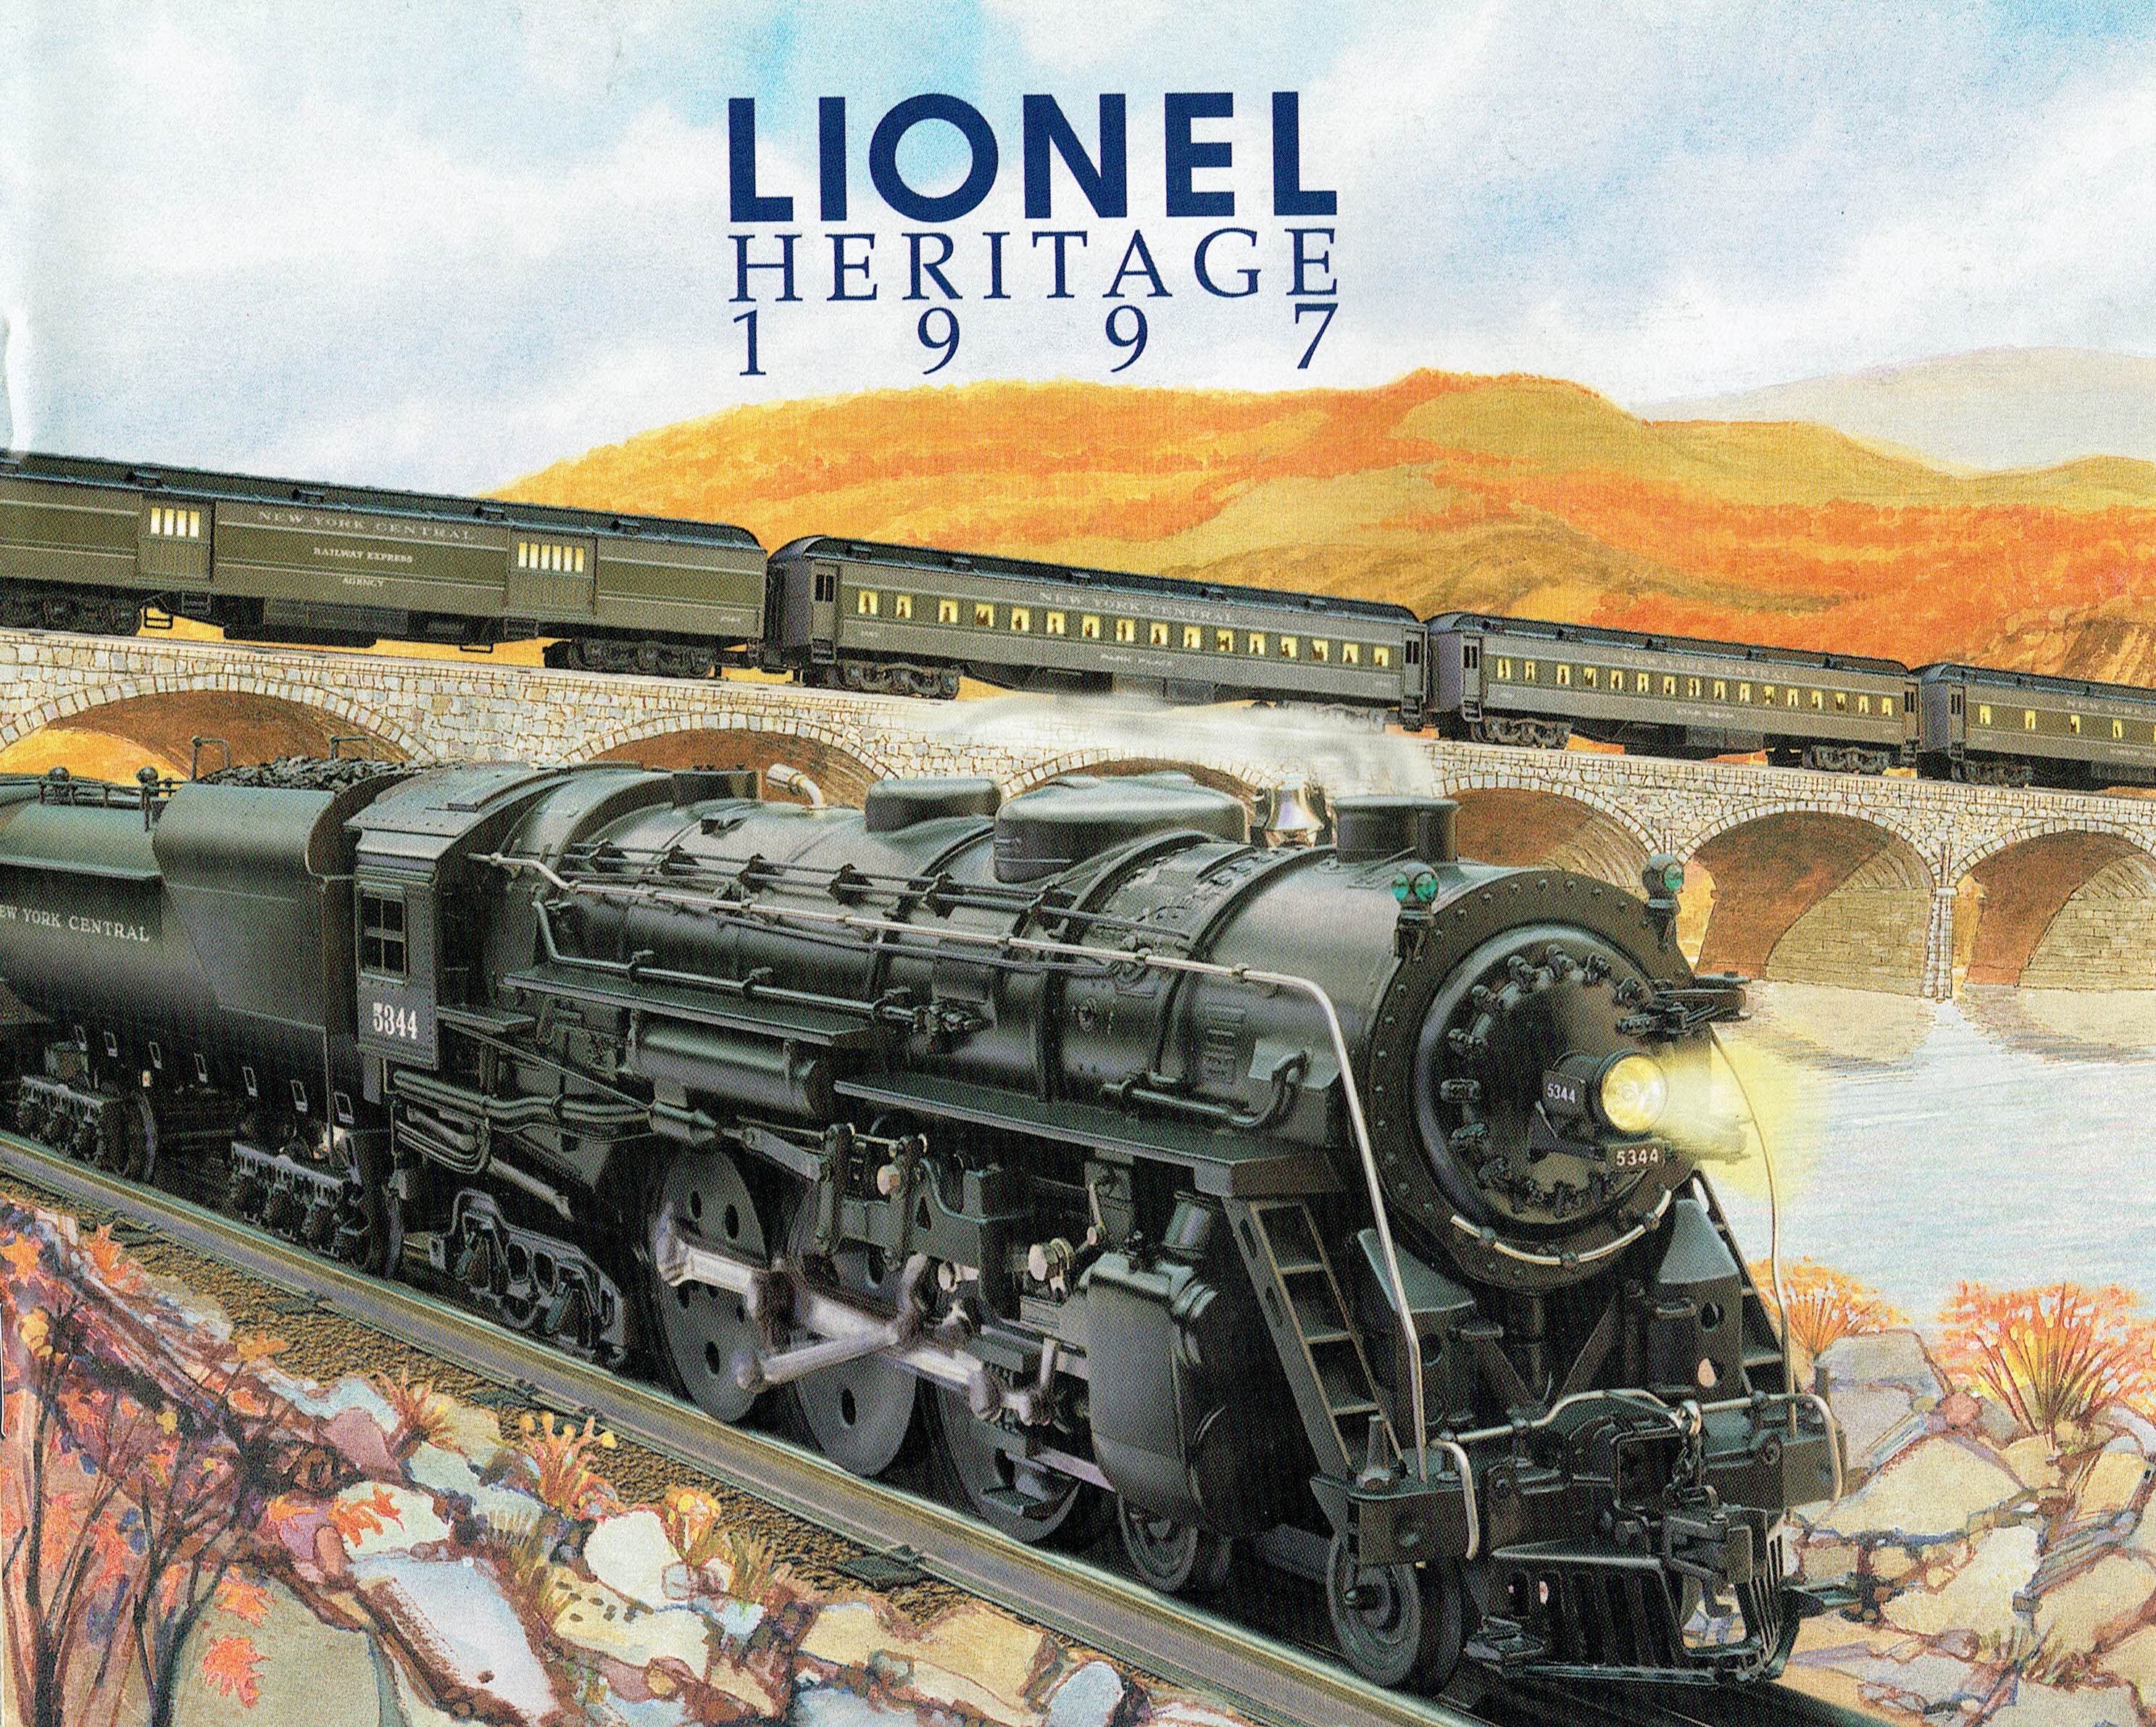 Lionel 1997 Heritage (NYC steam on cover) Catalog image